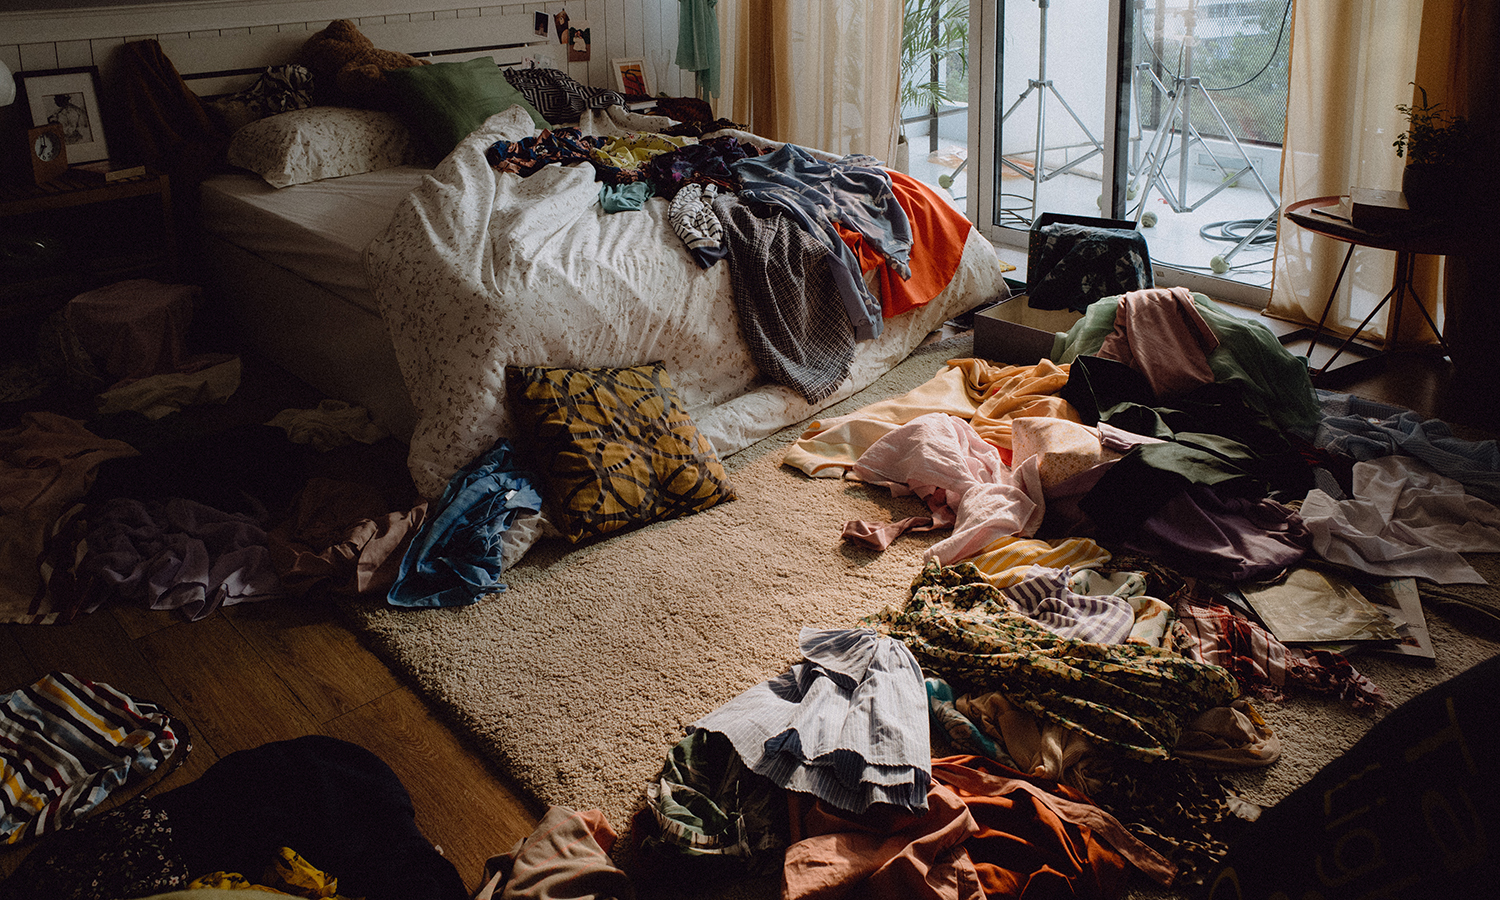 the messy house of someone with bipolar disorder